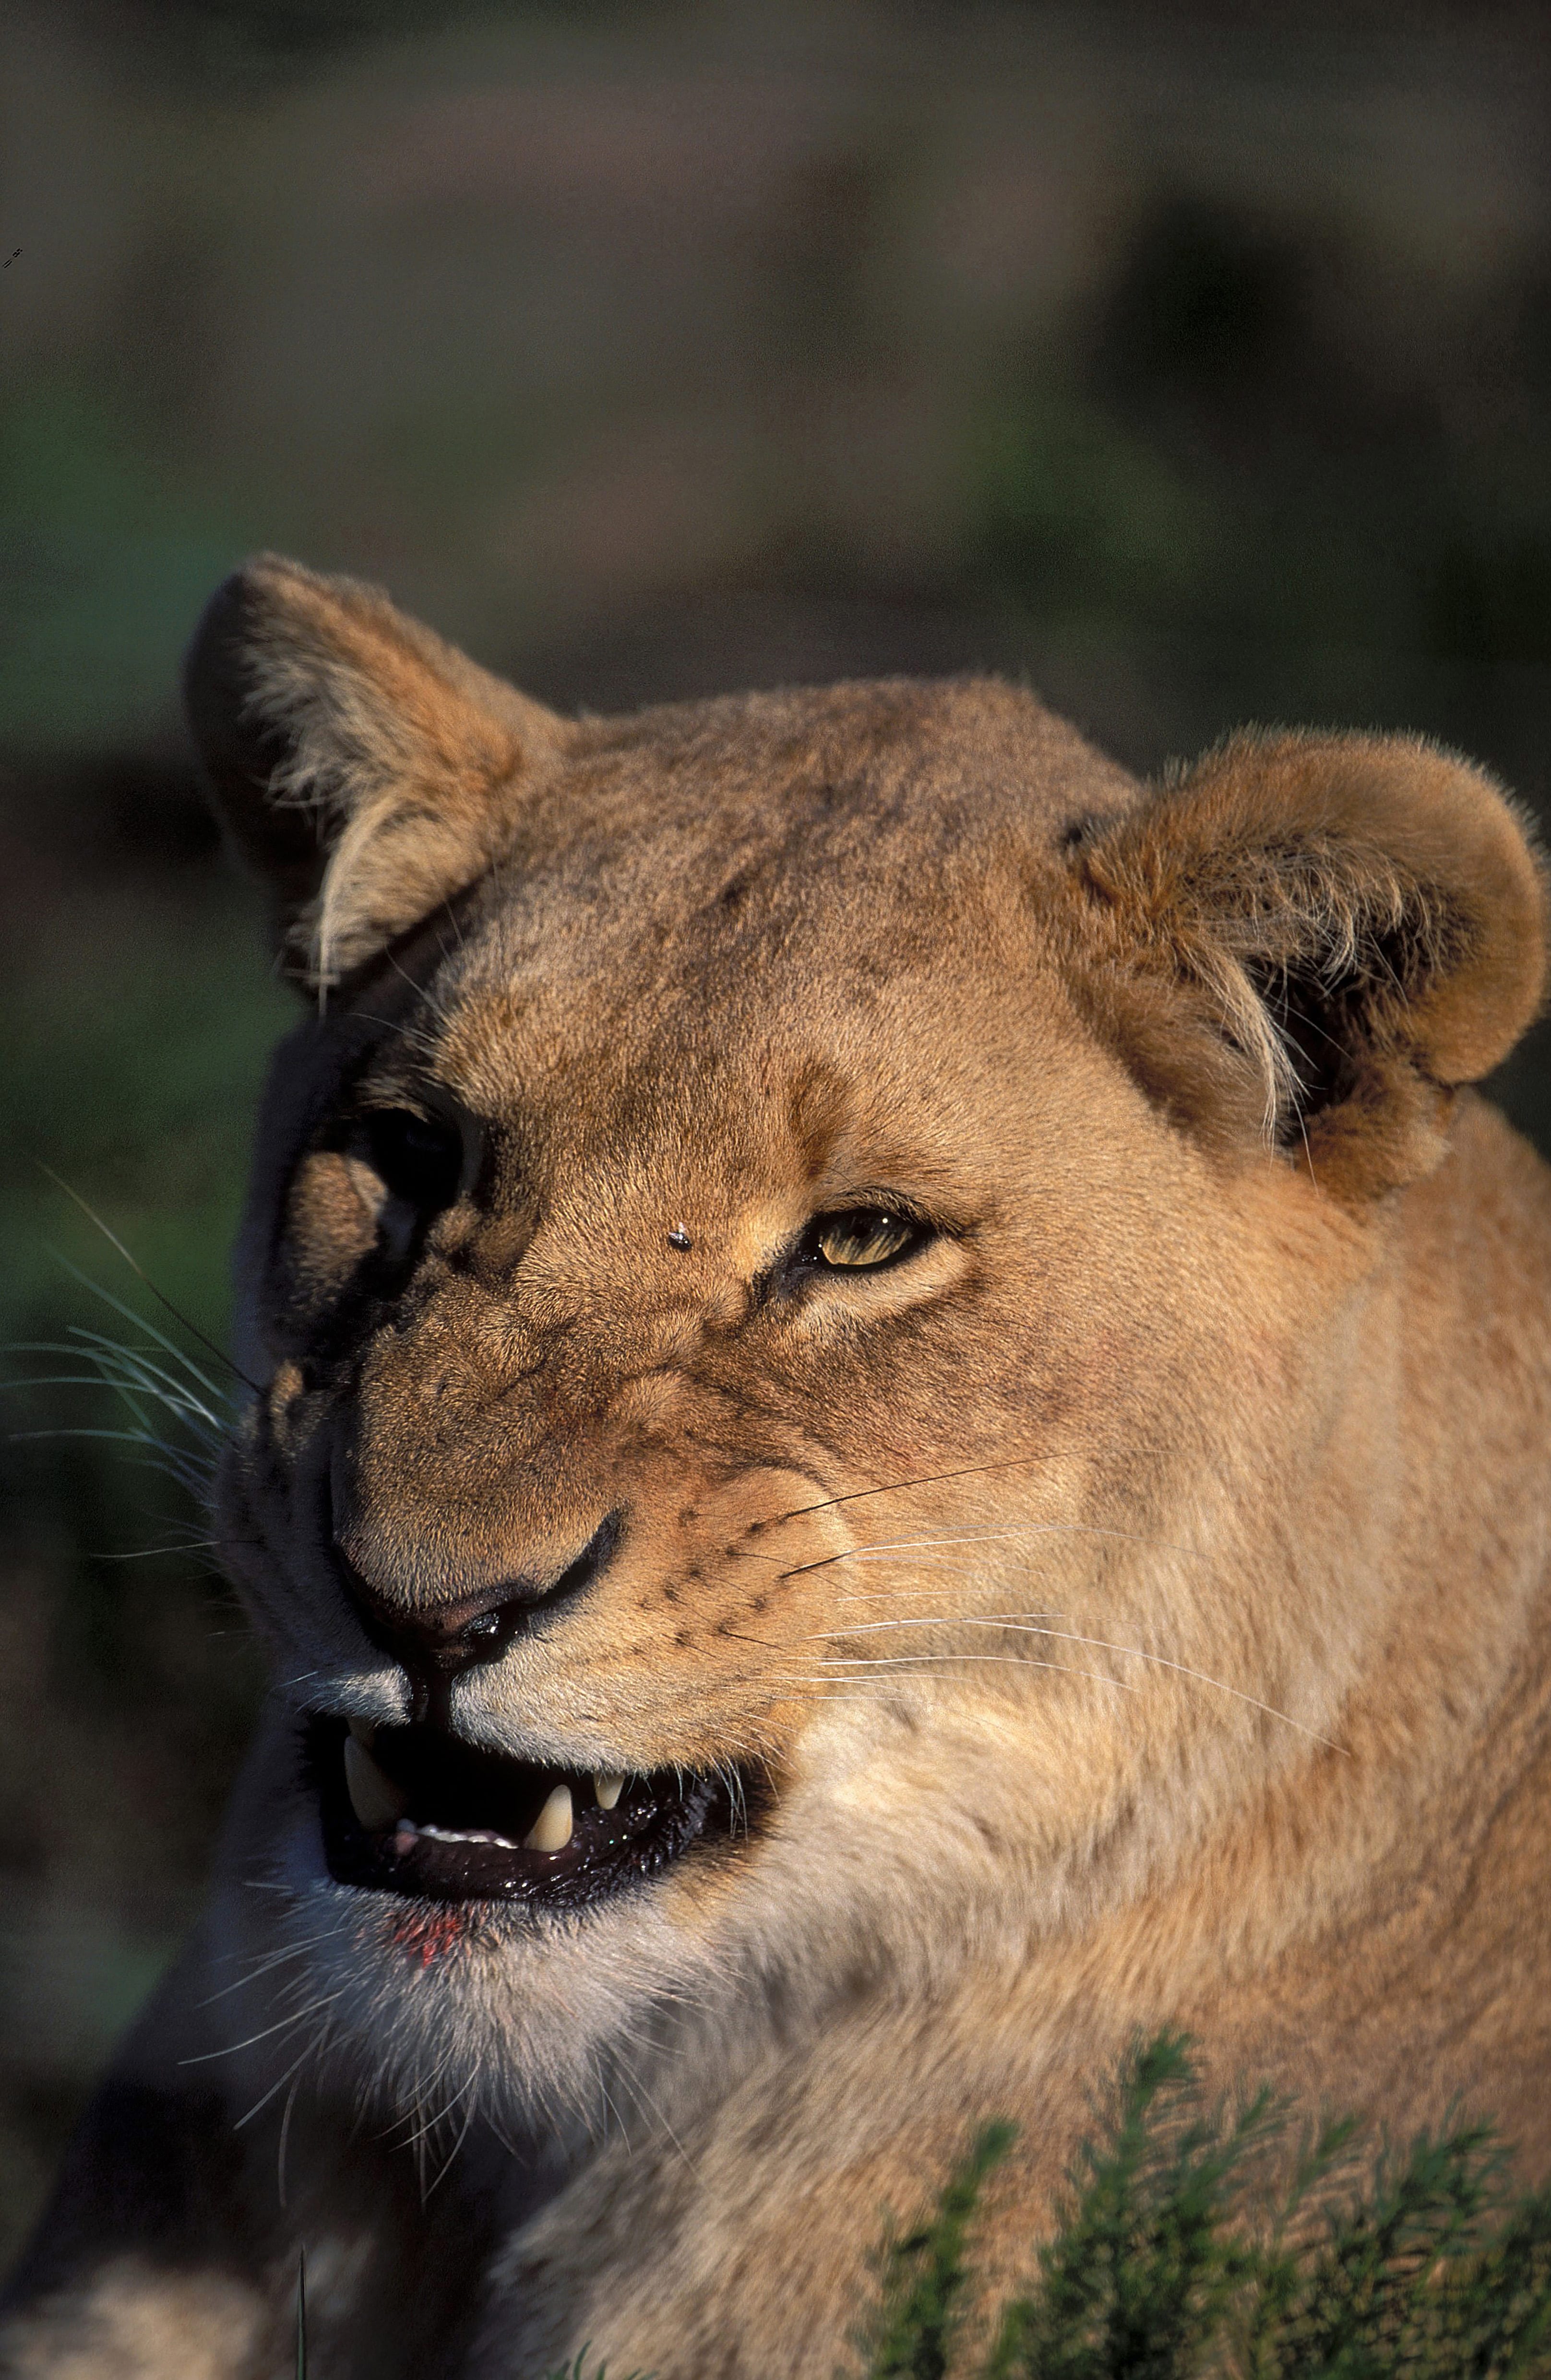 A Female lion snarling (00010874)